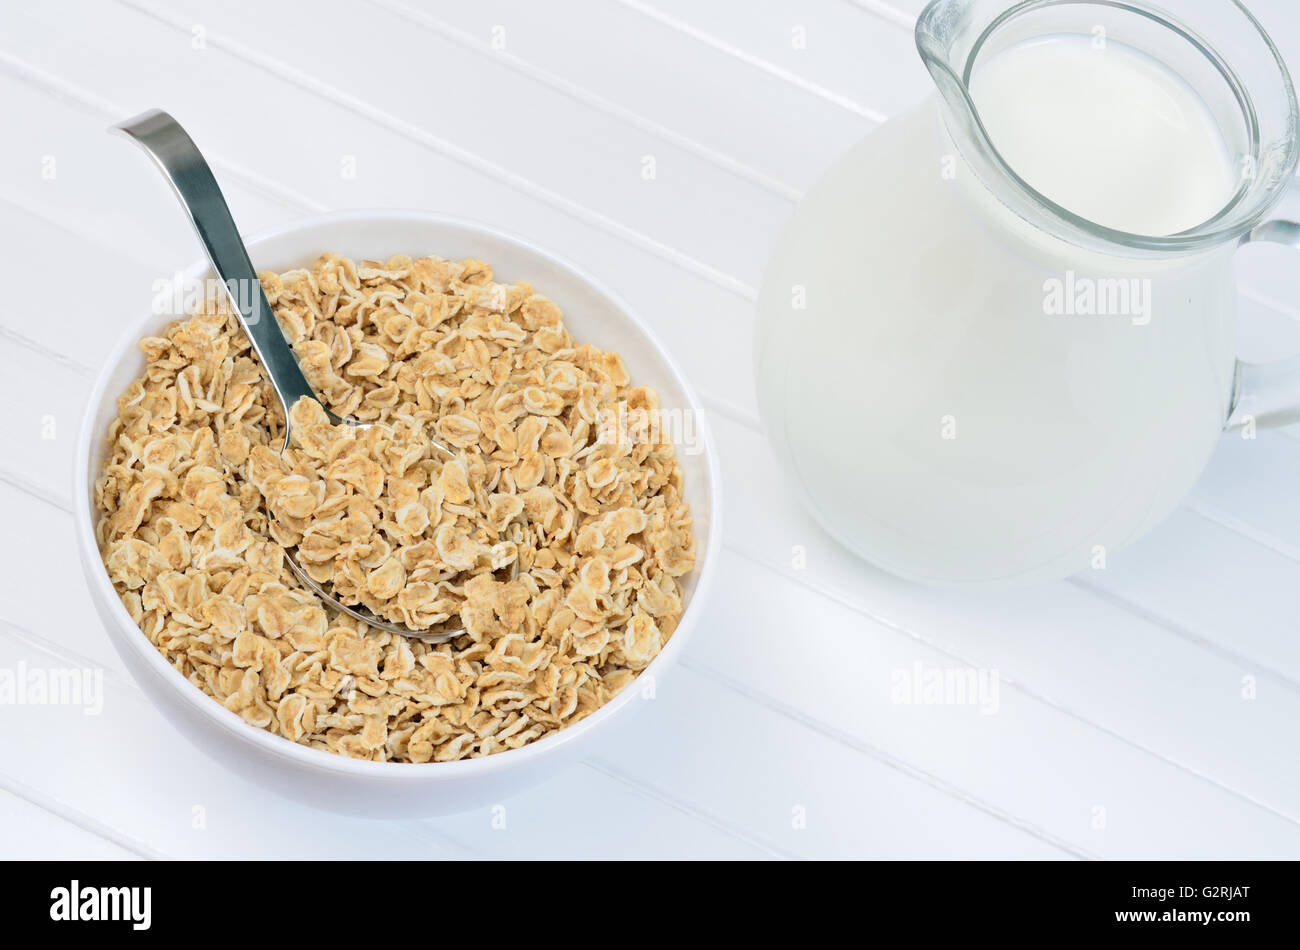 Healthy oatmeal in a white bowl and pitcher with milk on wooden table Stock Photo